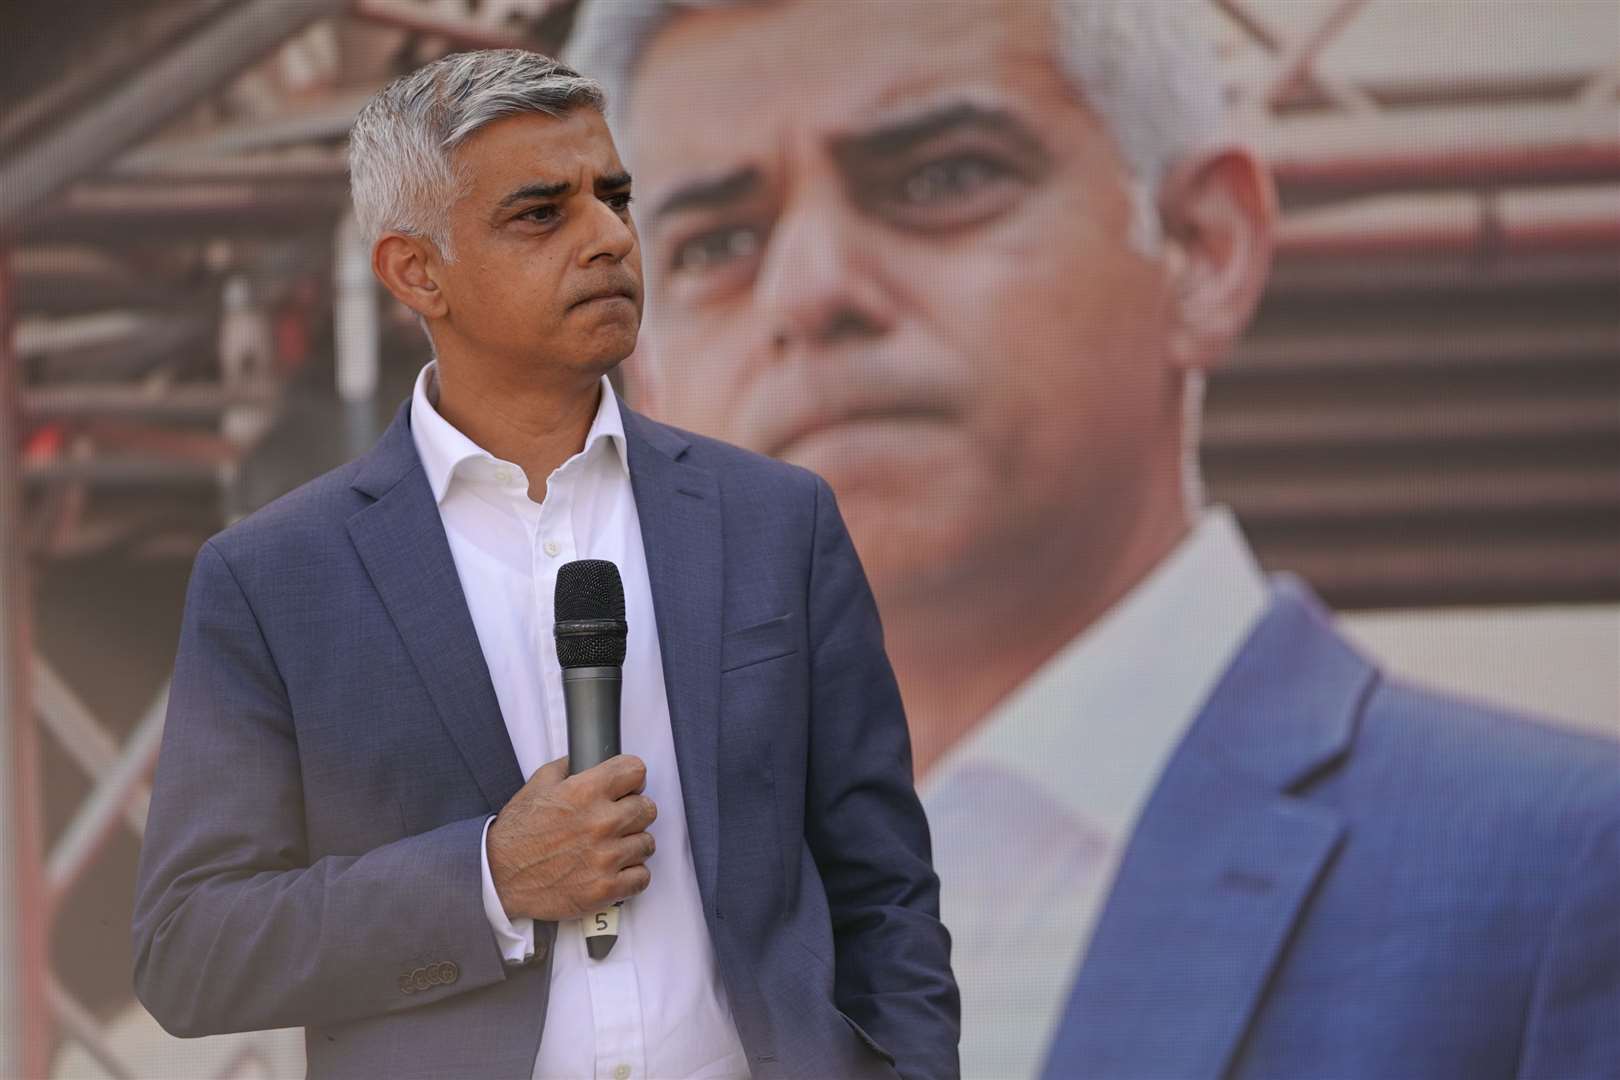 Mayor of London Sadiq Khan speaks to protesters (Kirsty O’Connor/PA)